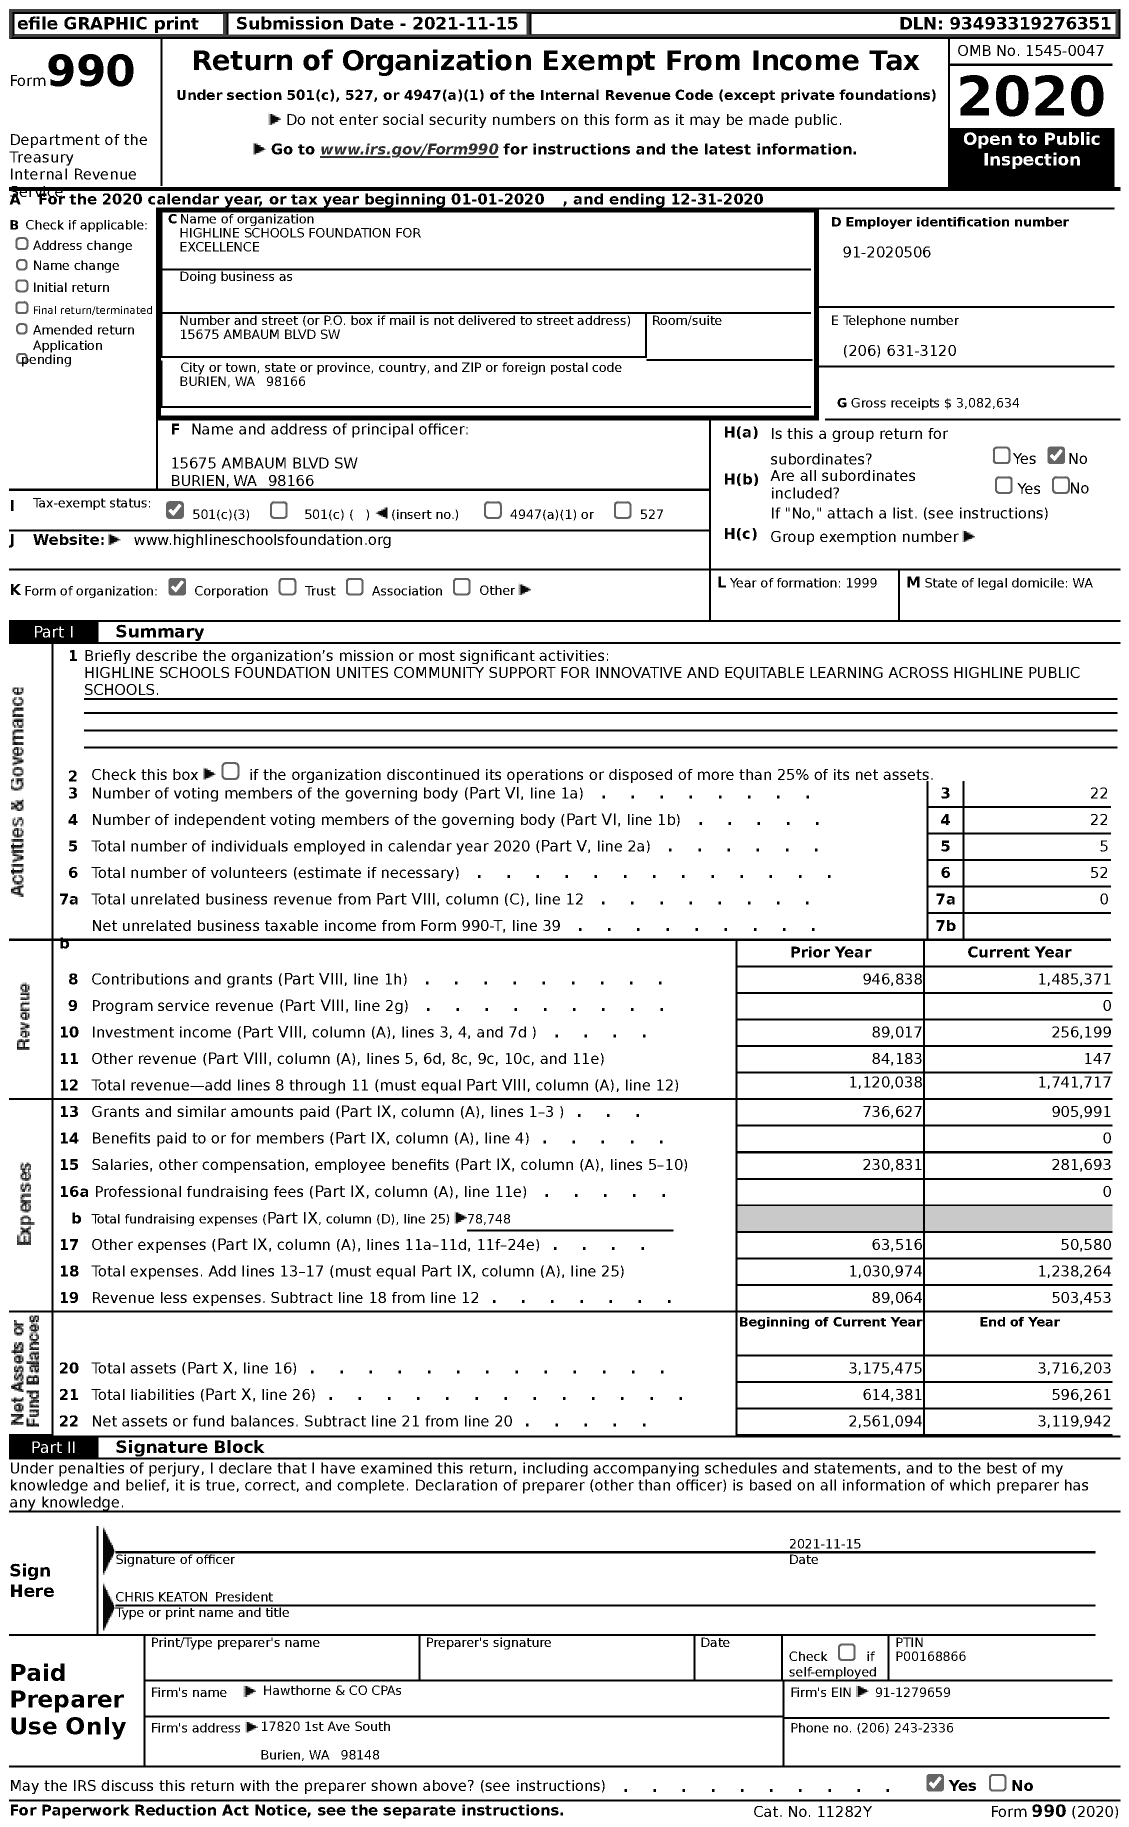 Image of first page of 2020 Form 990 for Highline Schools Foundation for Excellence